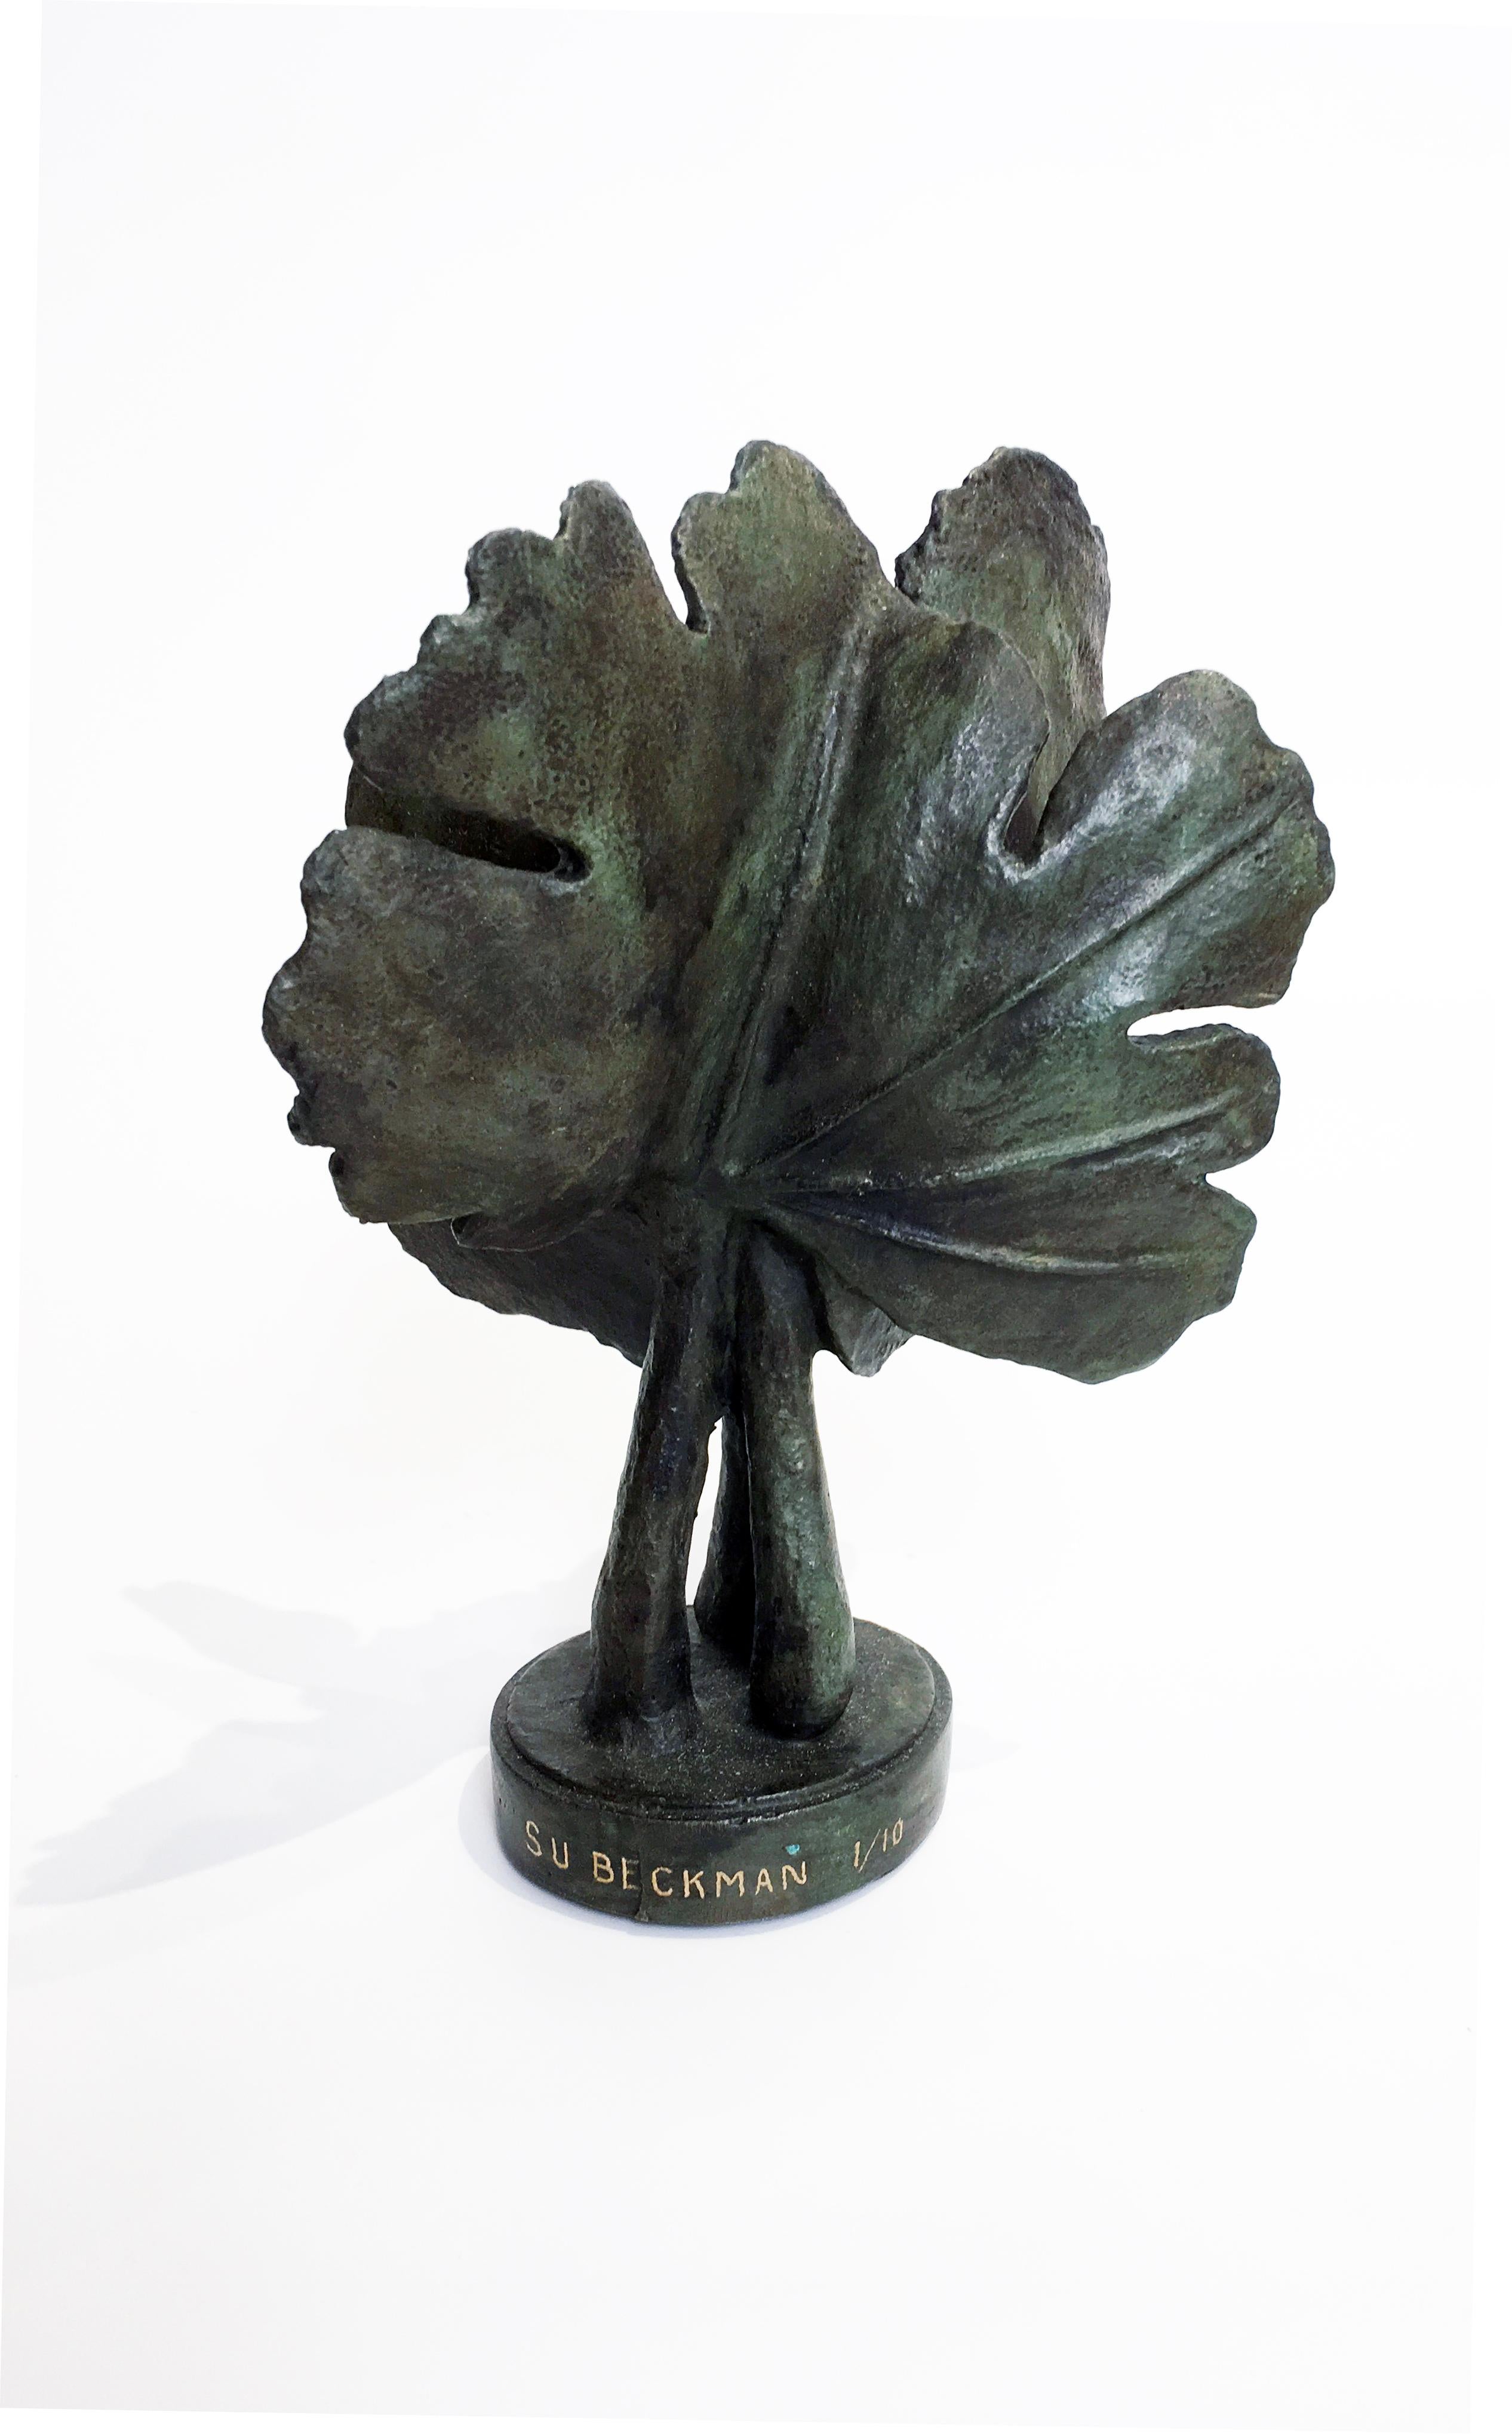 Bloodroot start to bloom before the foliage unfolds in early spring common in the upper Midwest of the United States. After blooming, the leaves unfurl to their full size as seen in this bronze sculpture by Sylvia Beckman. Made with the ancient lost